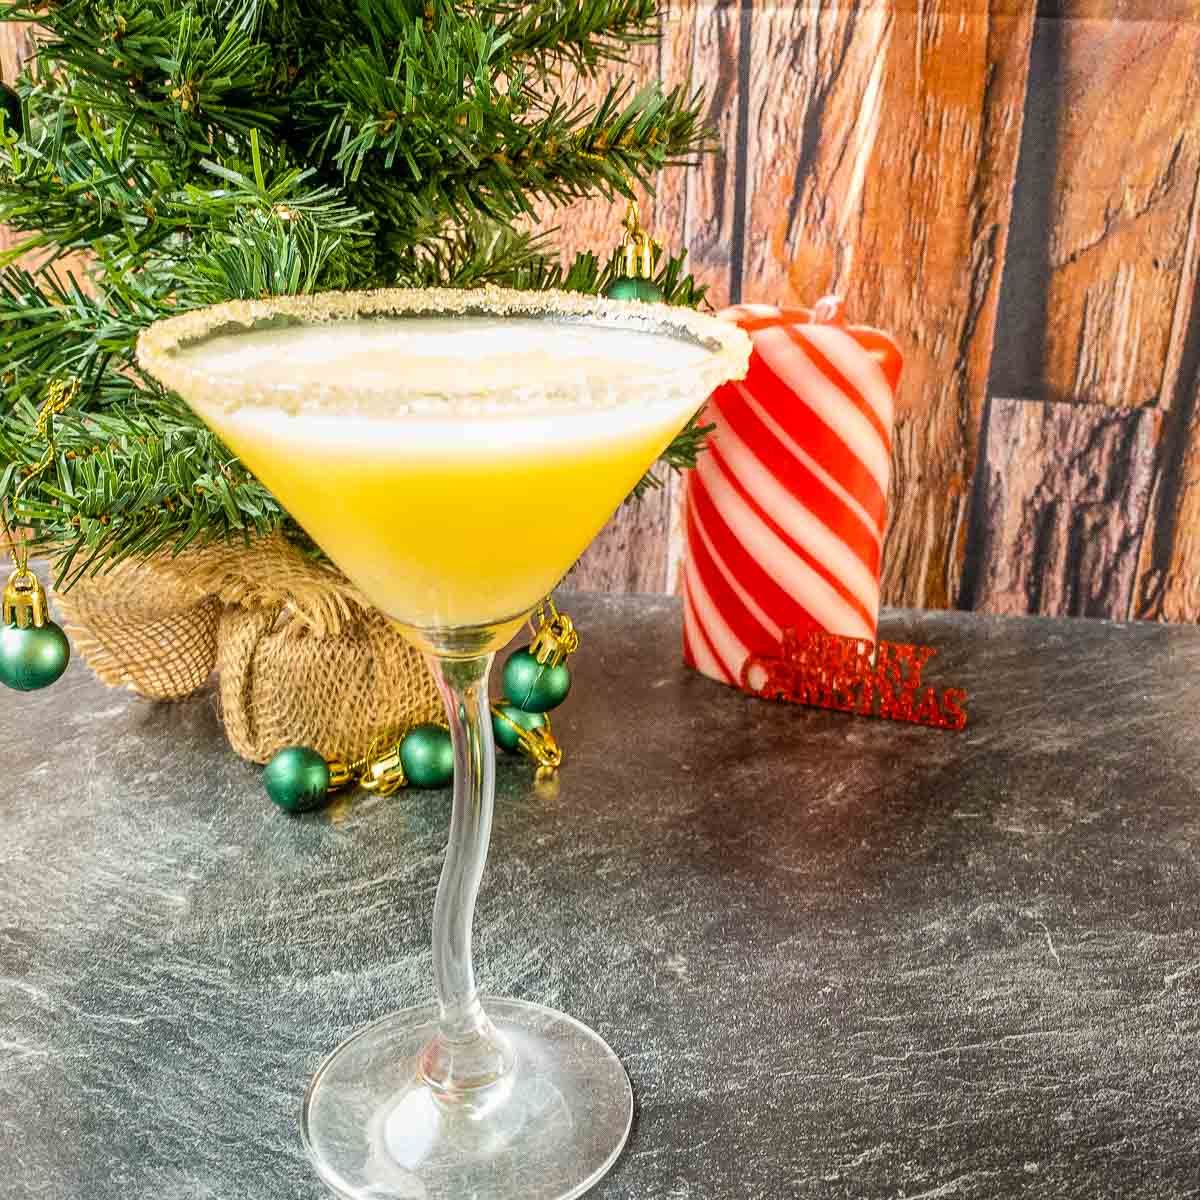 How to make a Snowball Cocktail - combinegoodflavors.com